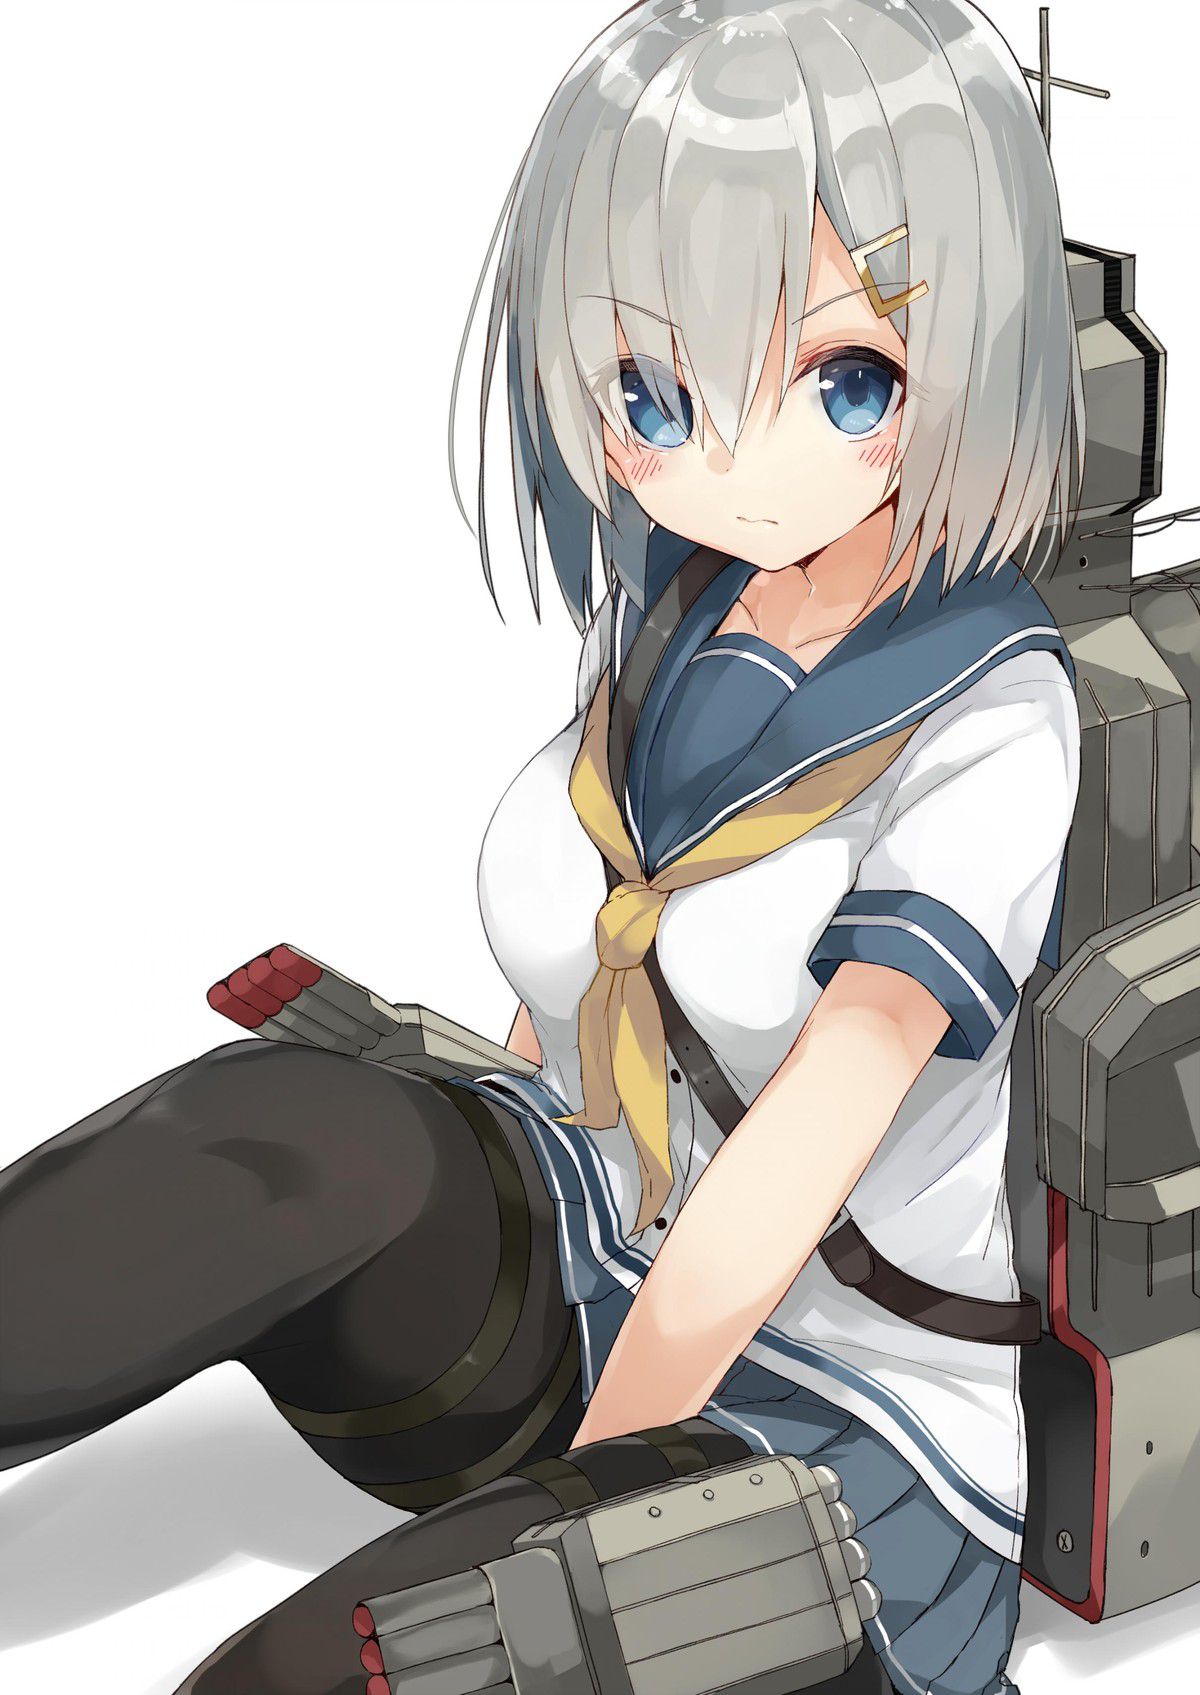 [Image] "ship this ' of warship daughter sexy cuteness is abnormal wwwwwwwwwwww 43